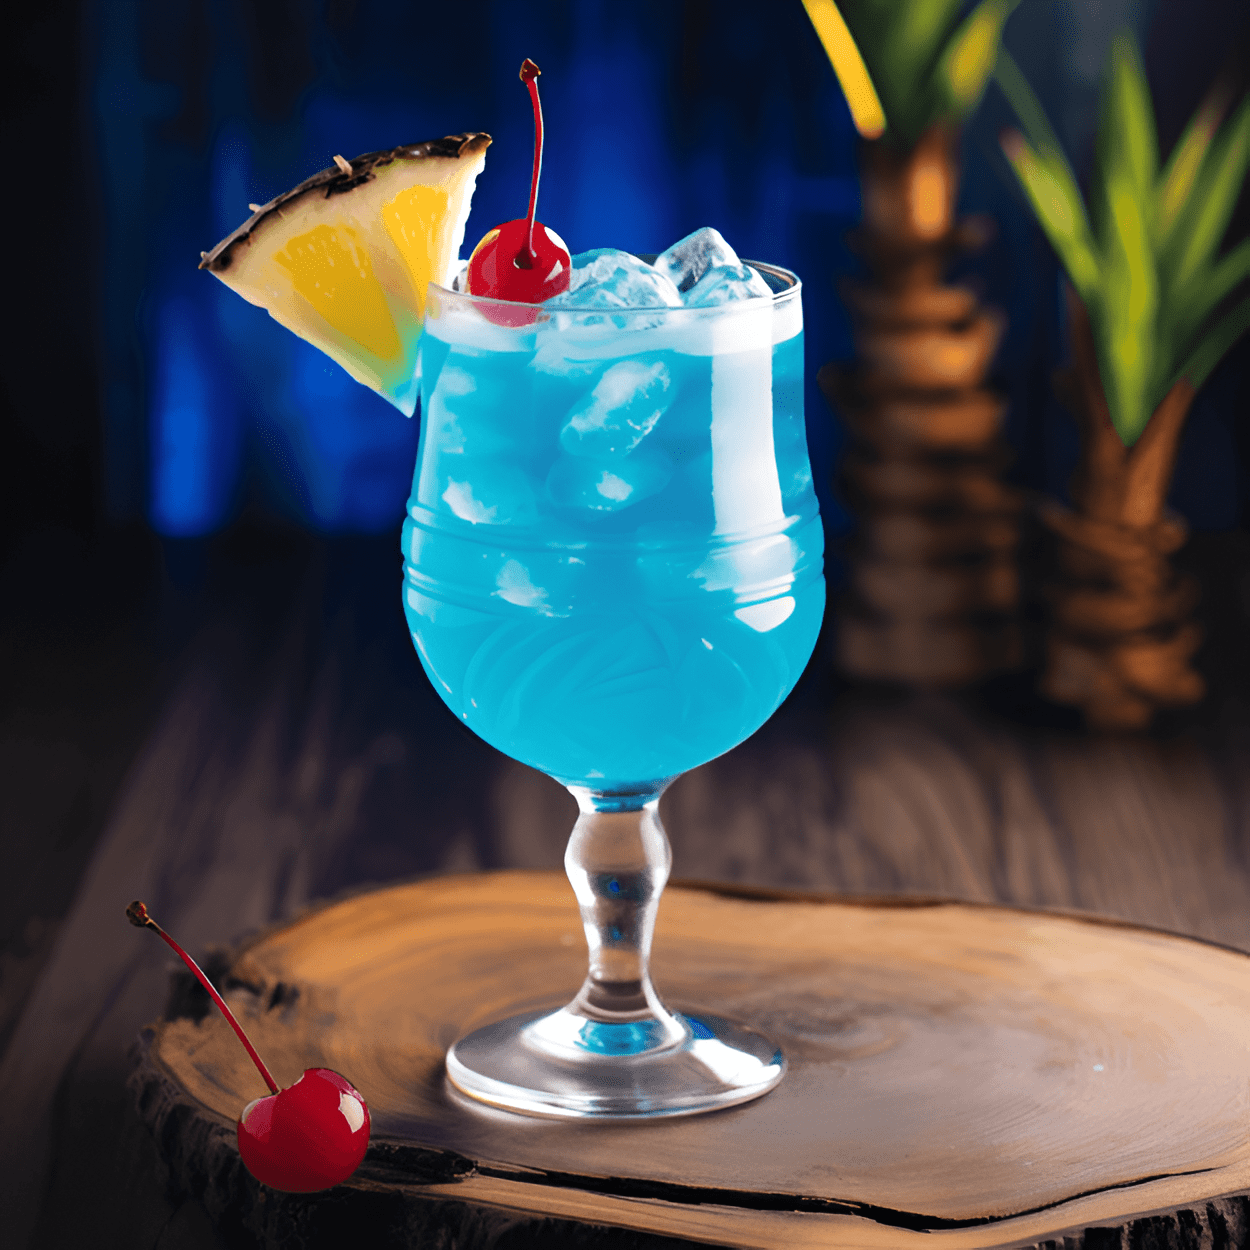 The Blue Ball cocktail is a sweet, fruity cocktail with a vibrant blue color. It has a strong citrus flavor, with a hint of coconut and a slight tang from the pineapple. The blue curacao gives it a unique, tropical taste that is both refreshing and delicious.